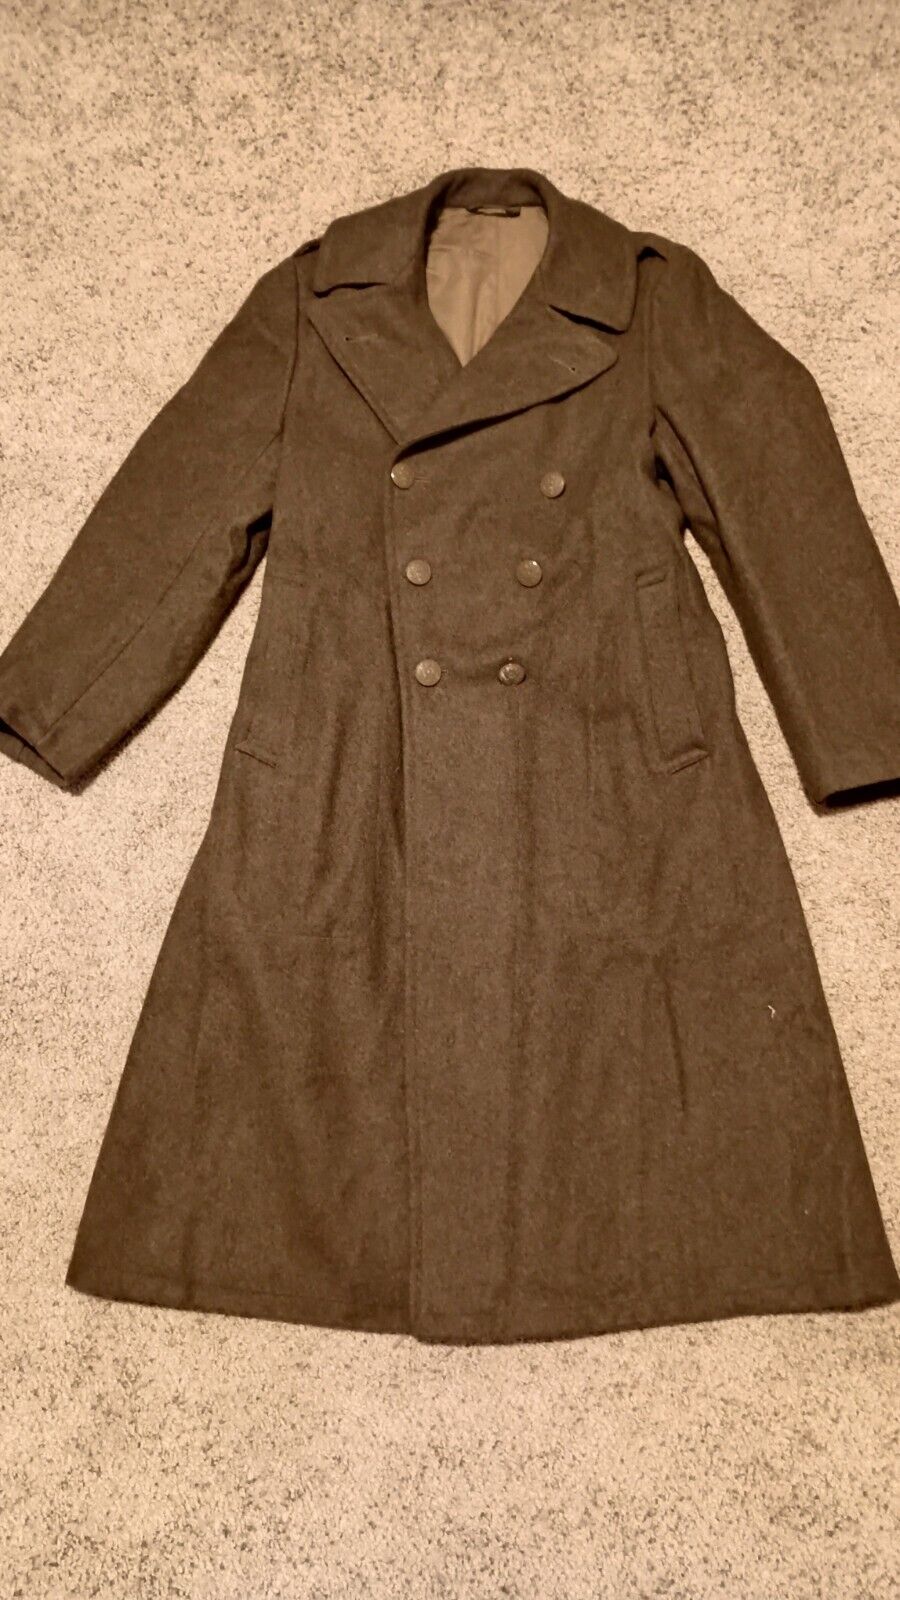 WW2 WWII 1945 Vintage US Army Trench Coat Overcoat, Wool, M1939, 38R VERY NICE